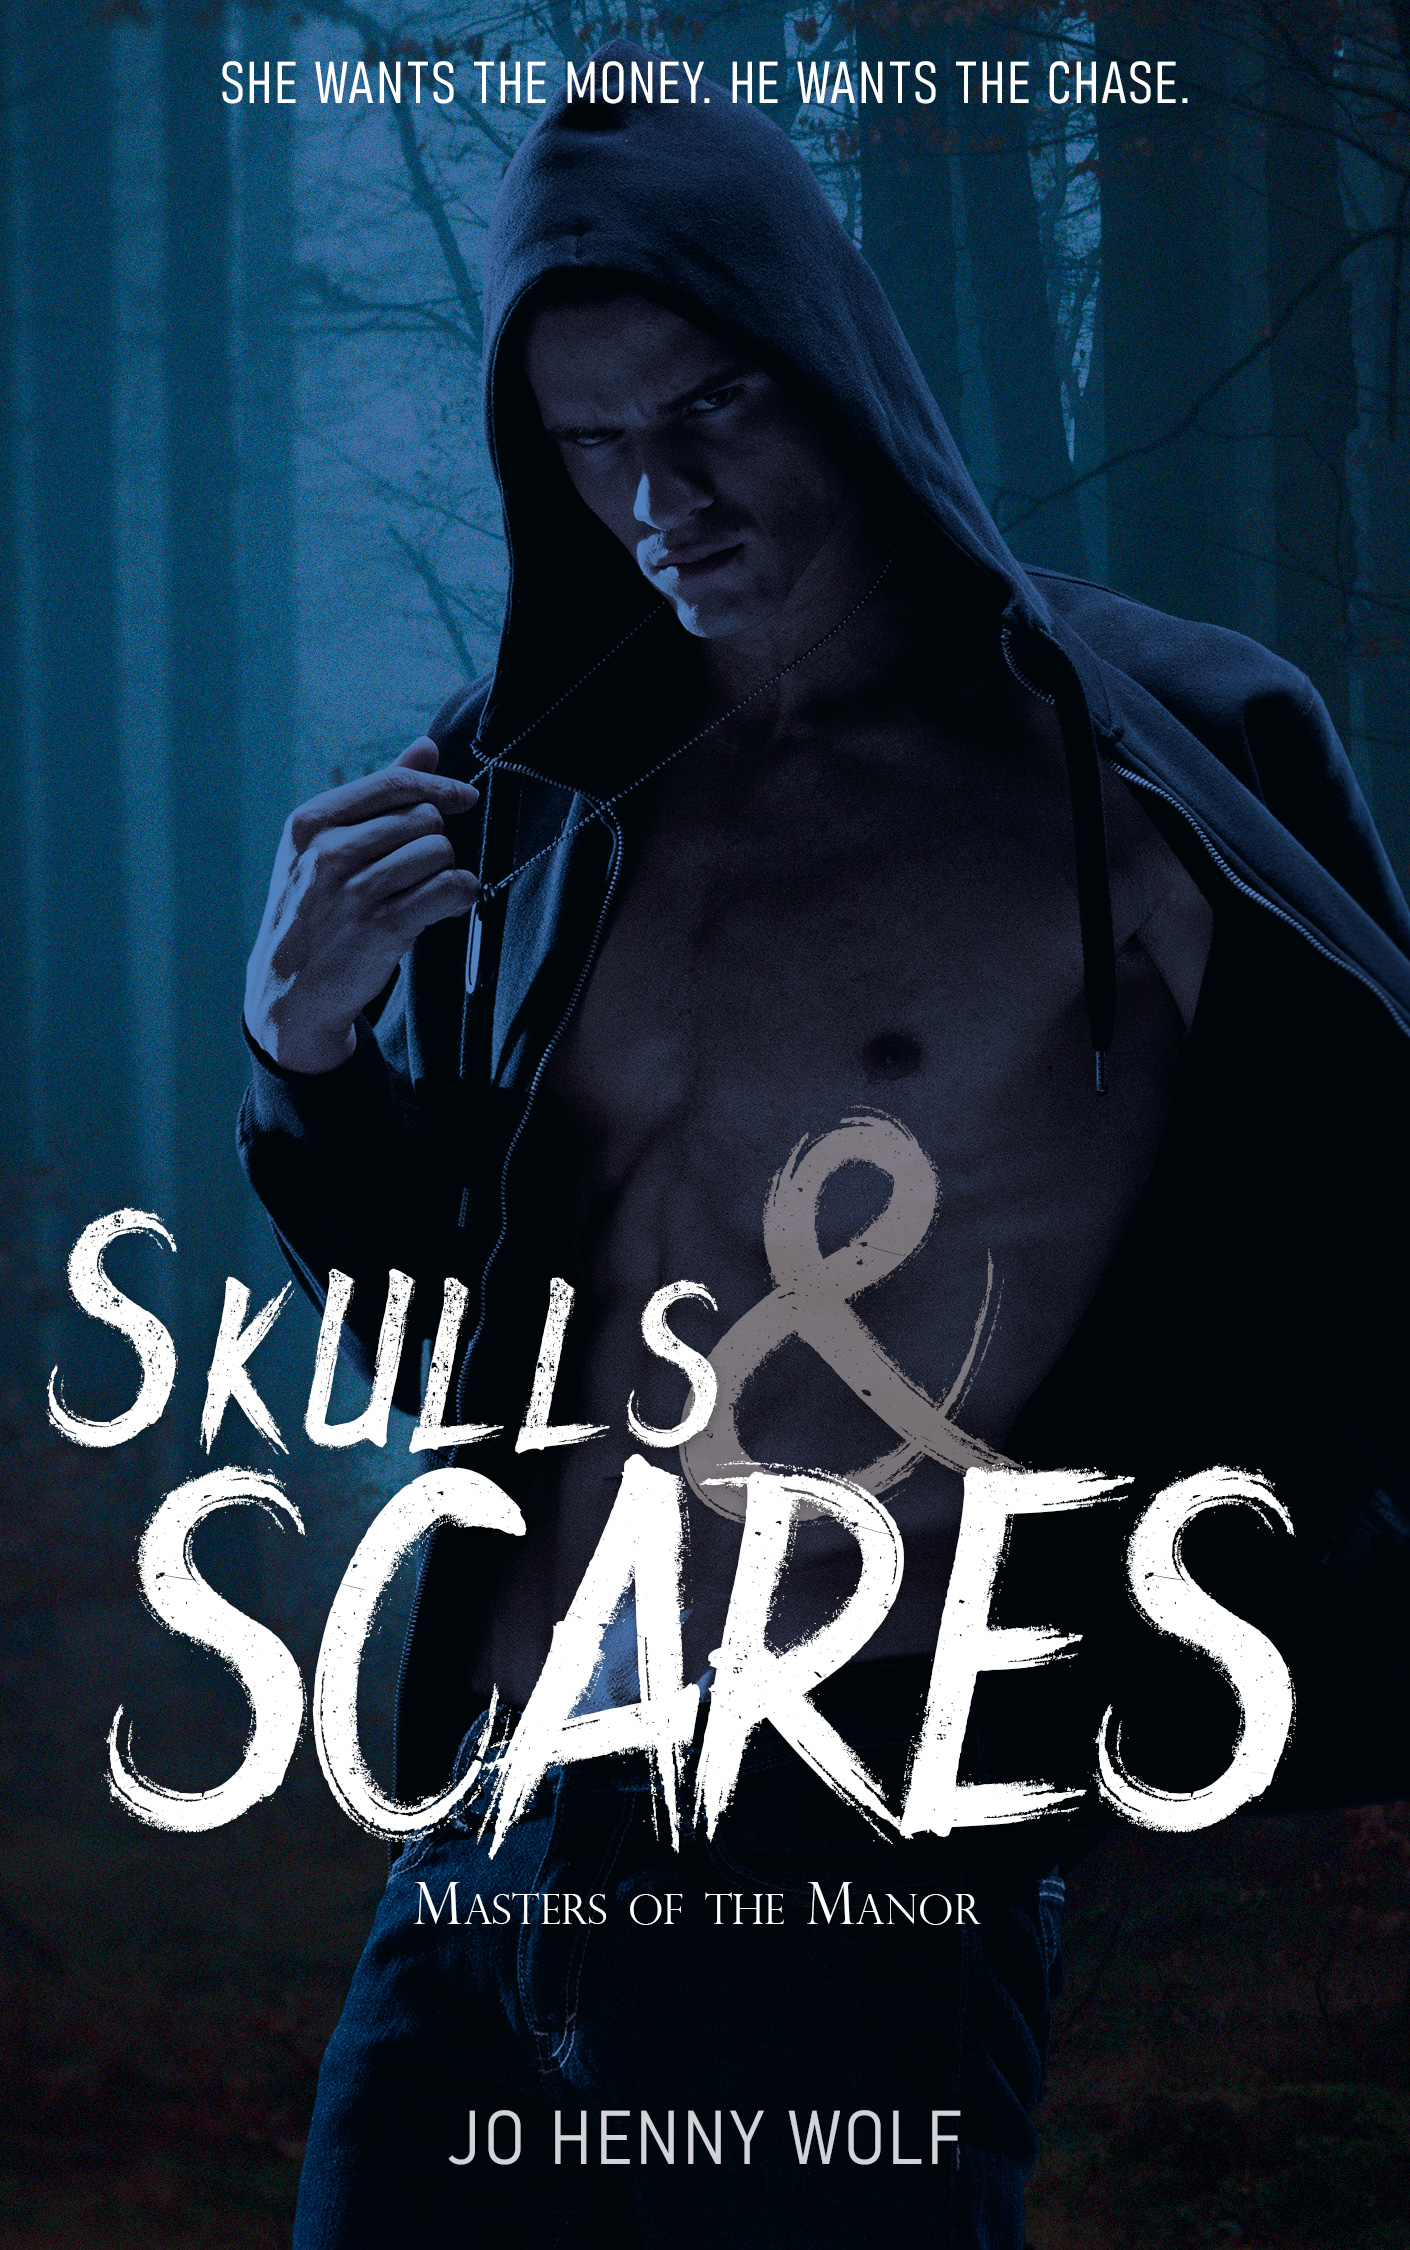 Cover of Skulls and Scares by Jo Henny Wolf